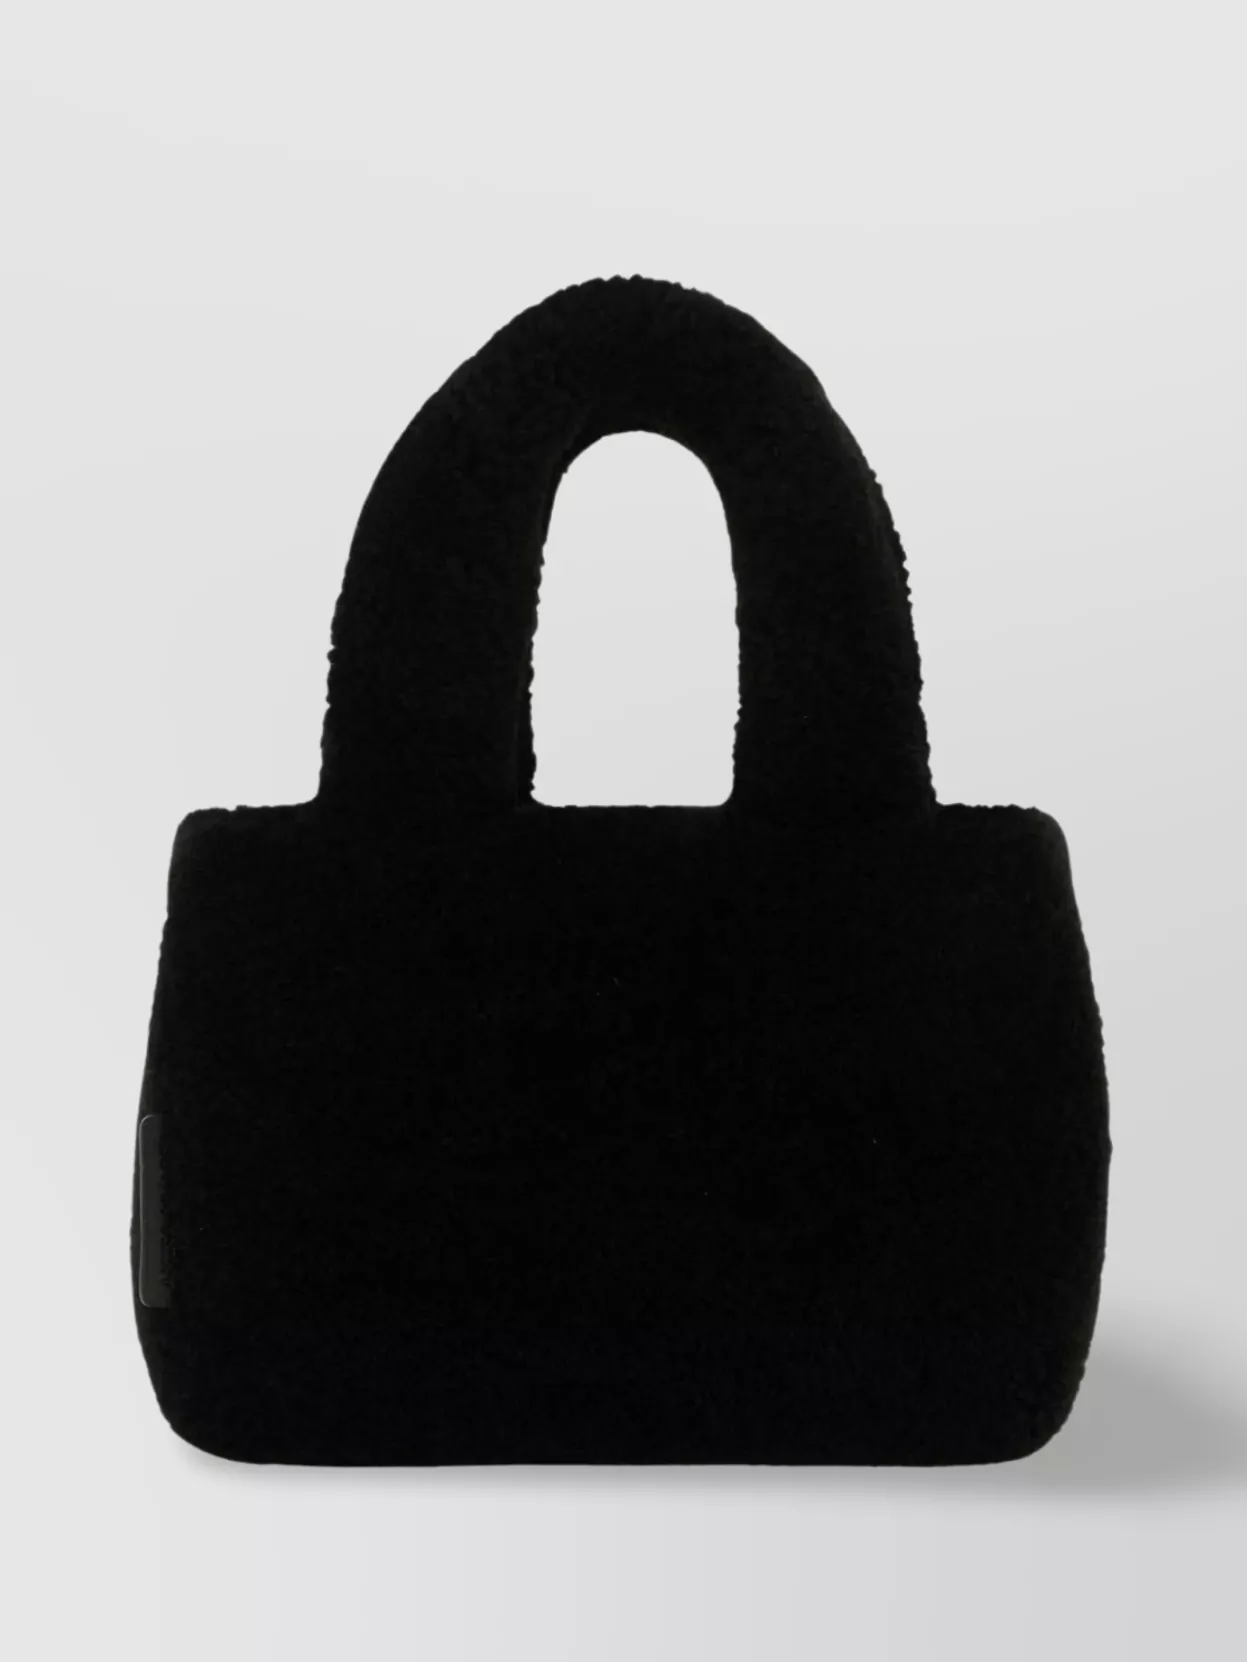 Shop Amina Muaddi Shearling Handbag With Twin Handles And Structured Silhouette